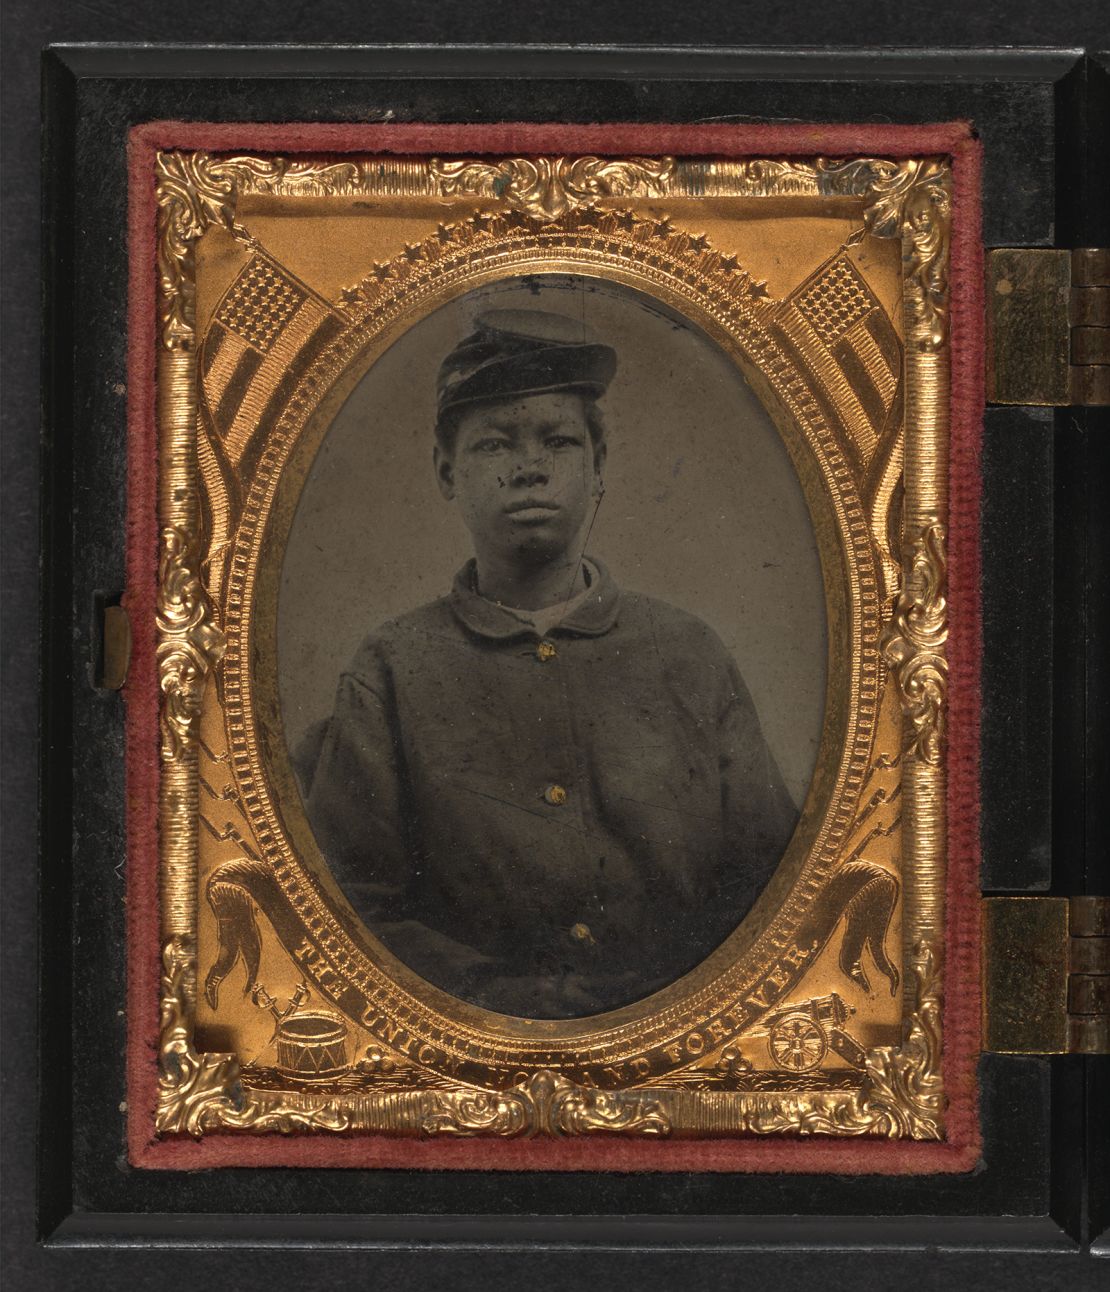 Portrait of an unidentified African American soldier in uniform, c. 1860s.